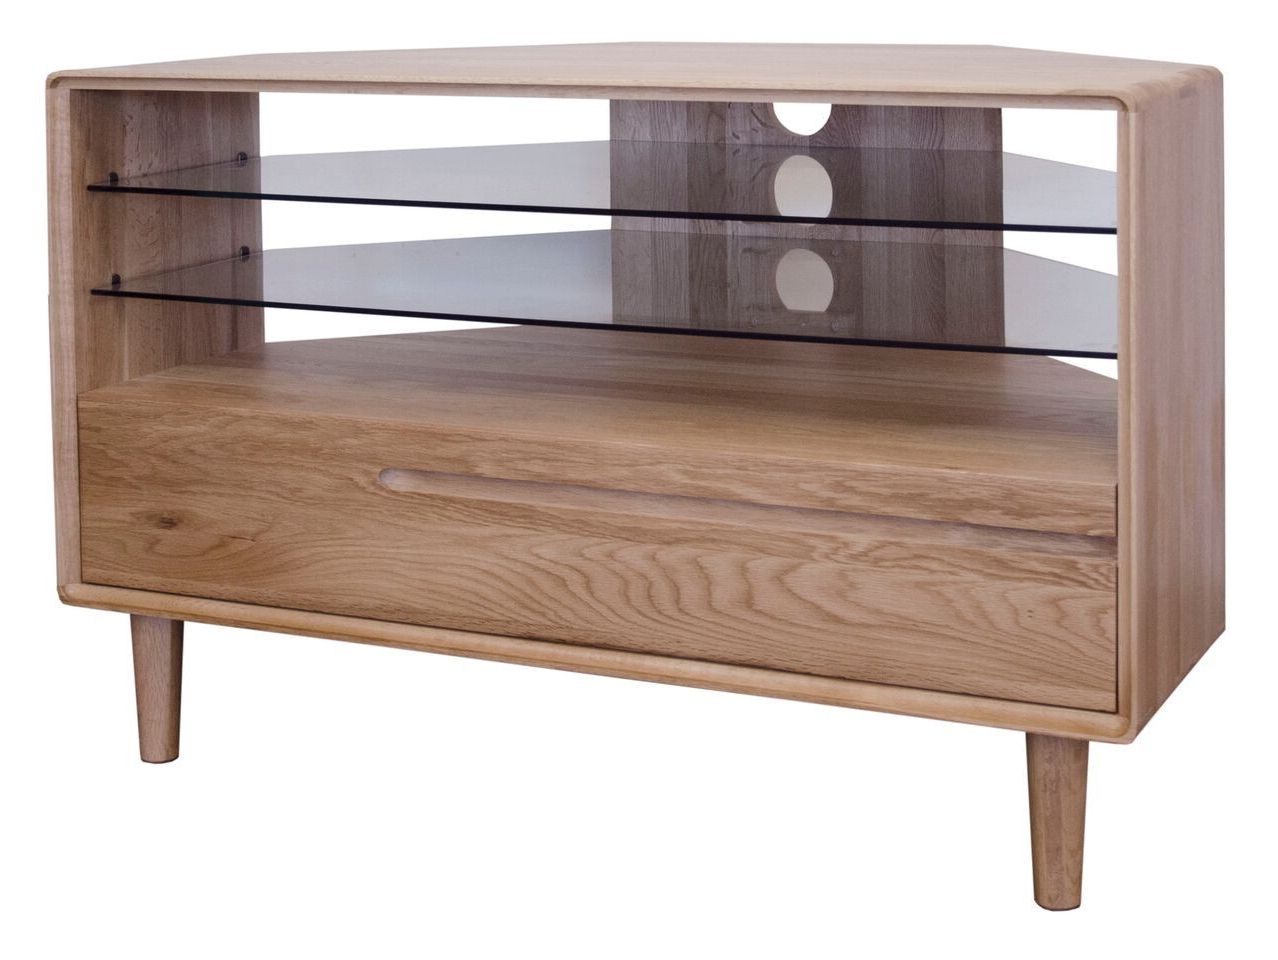 Homestyle Scandic Solid Oak Corner Tv Unit From The Bed Station Inside Widely Used Oak Corner Tv Cabinets (View 15 of 20)